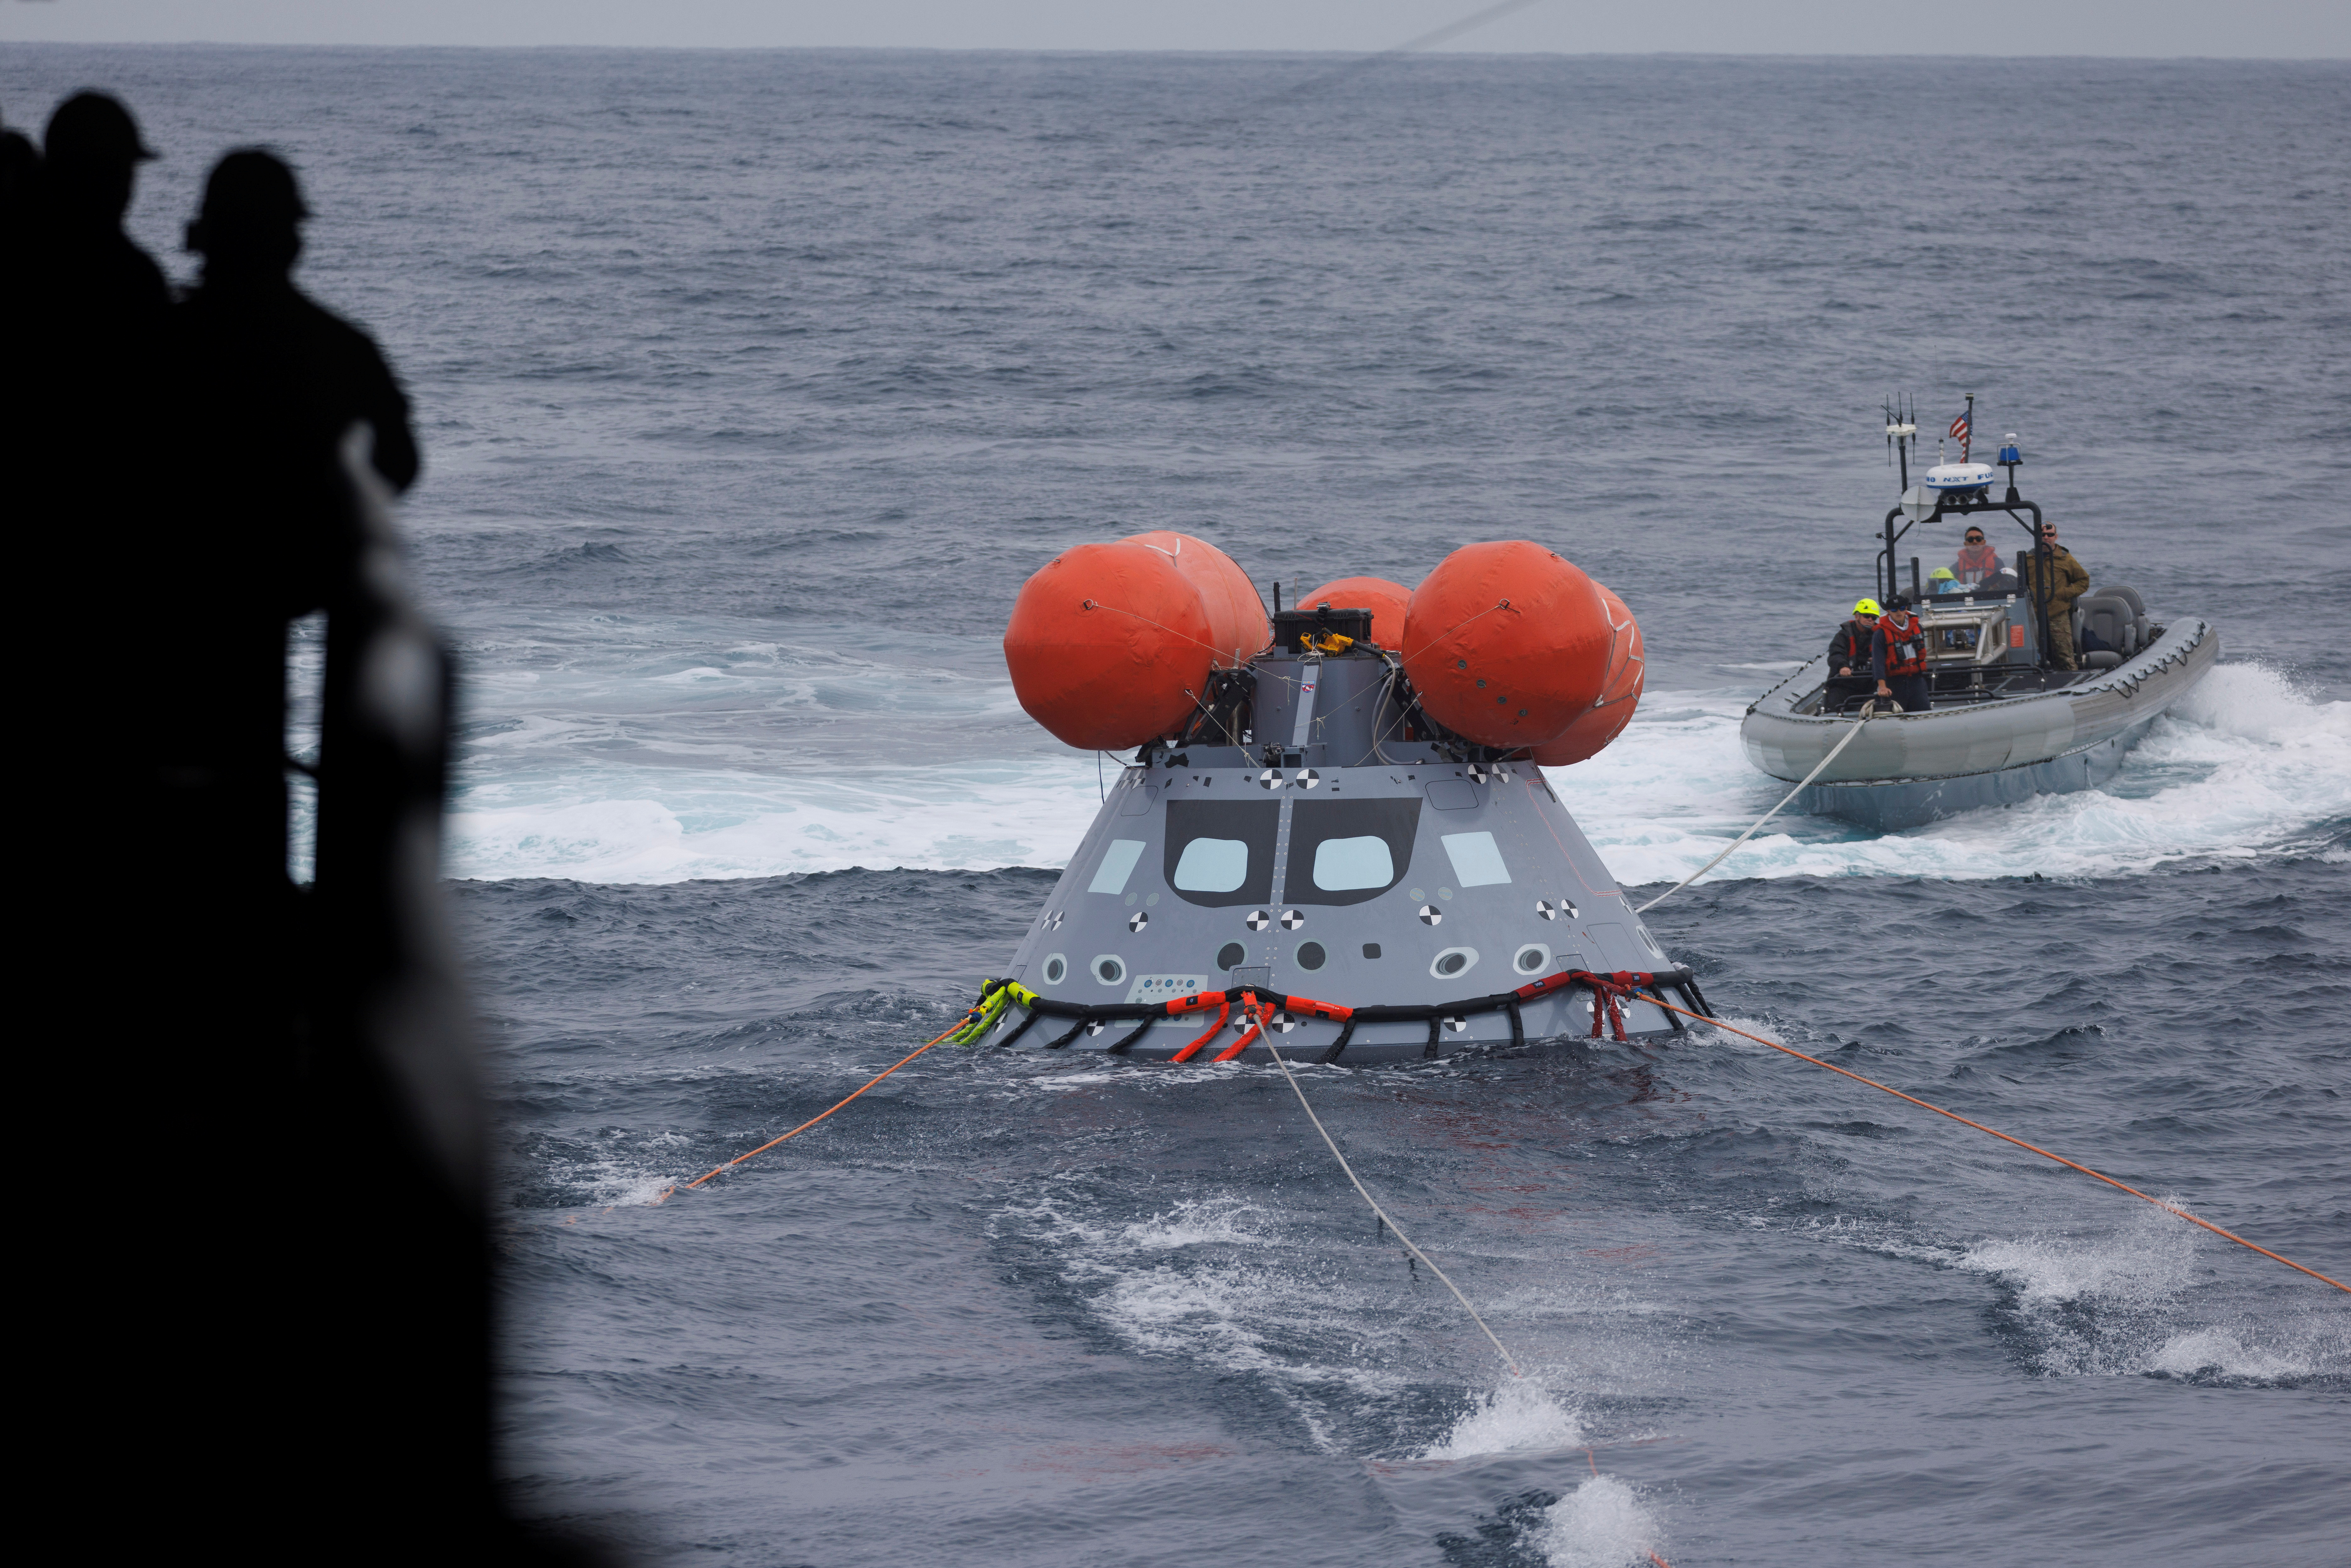 Test at sea using the Orion capsule (Reuters/Mike Blake)